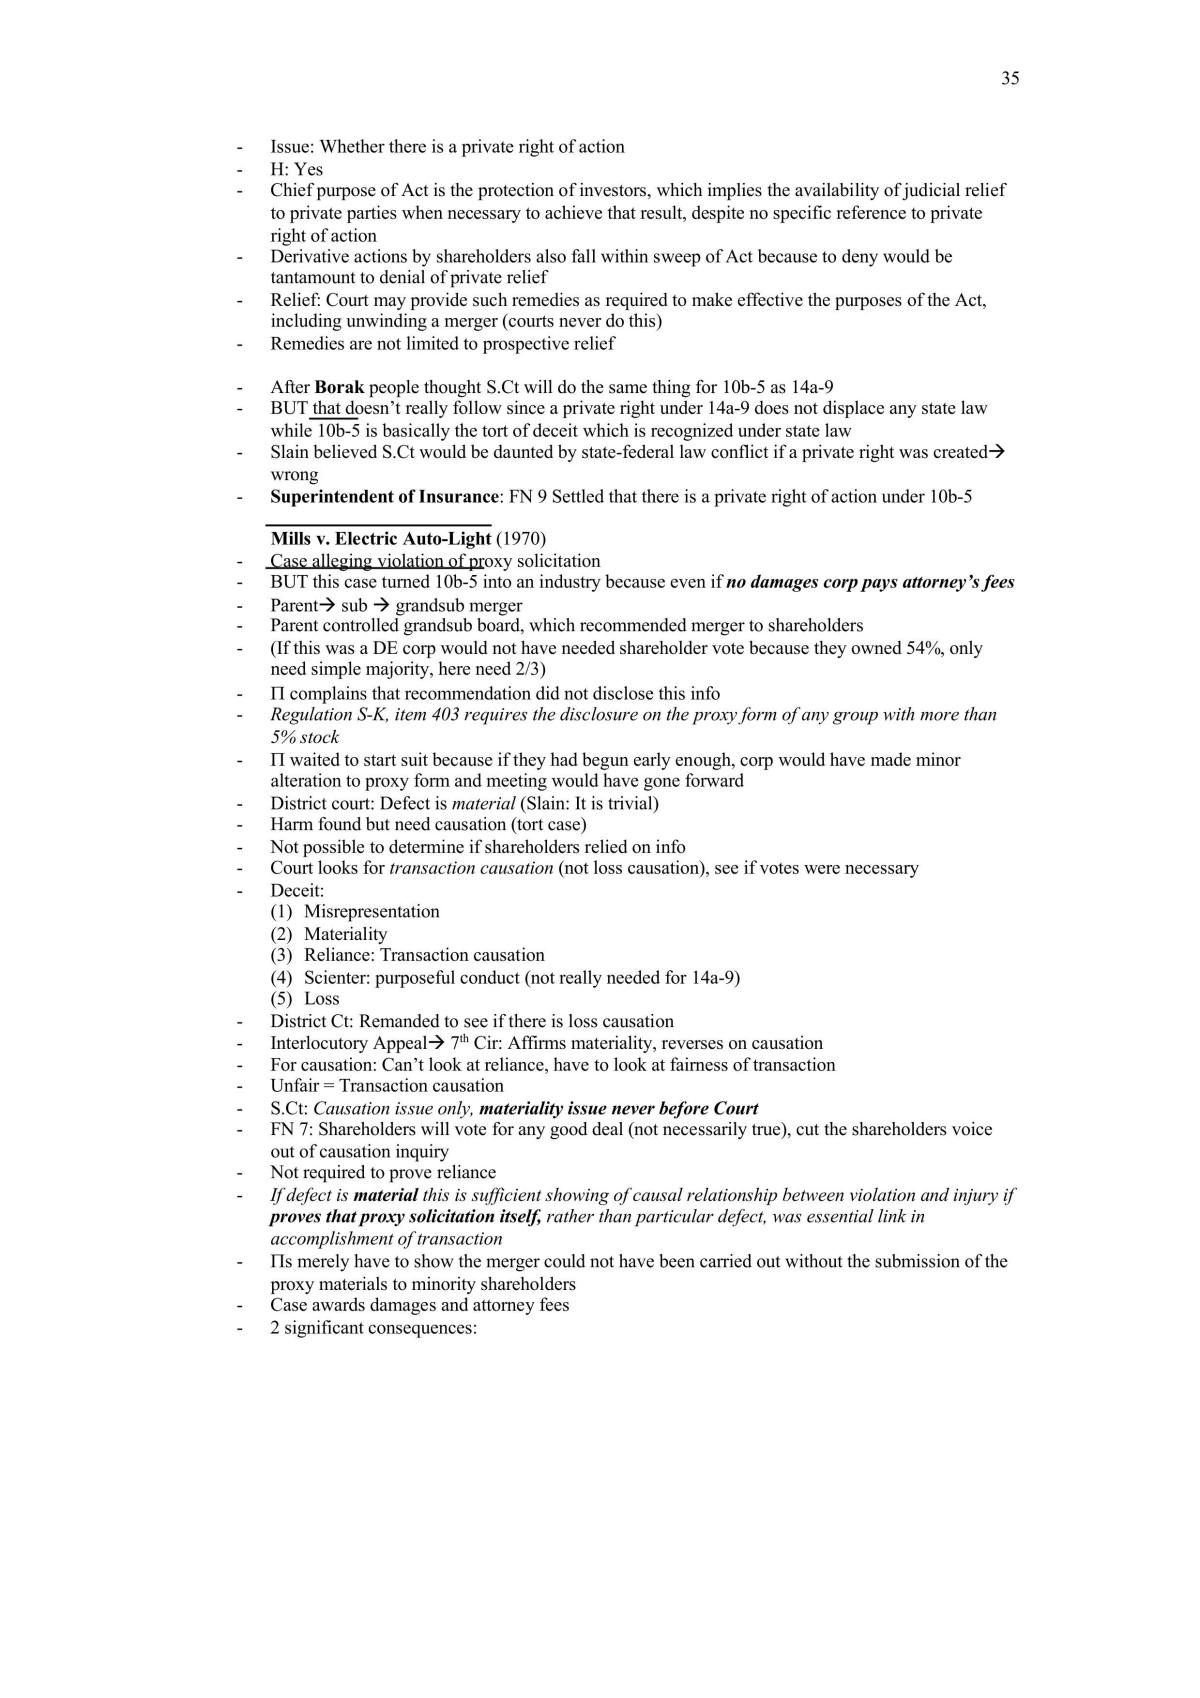 Securities Regulation Exam Outline - Page 35